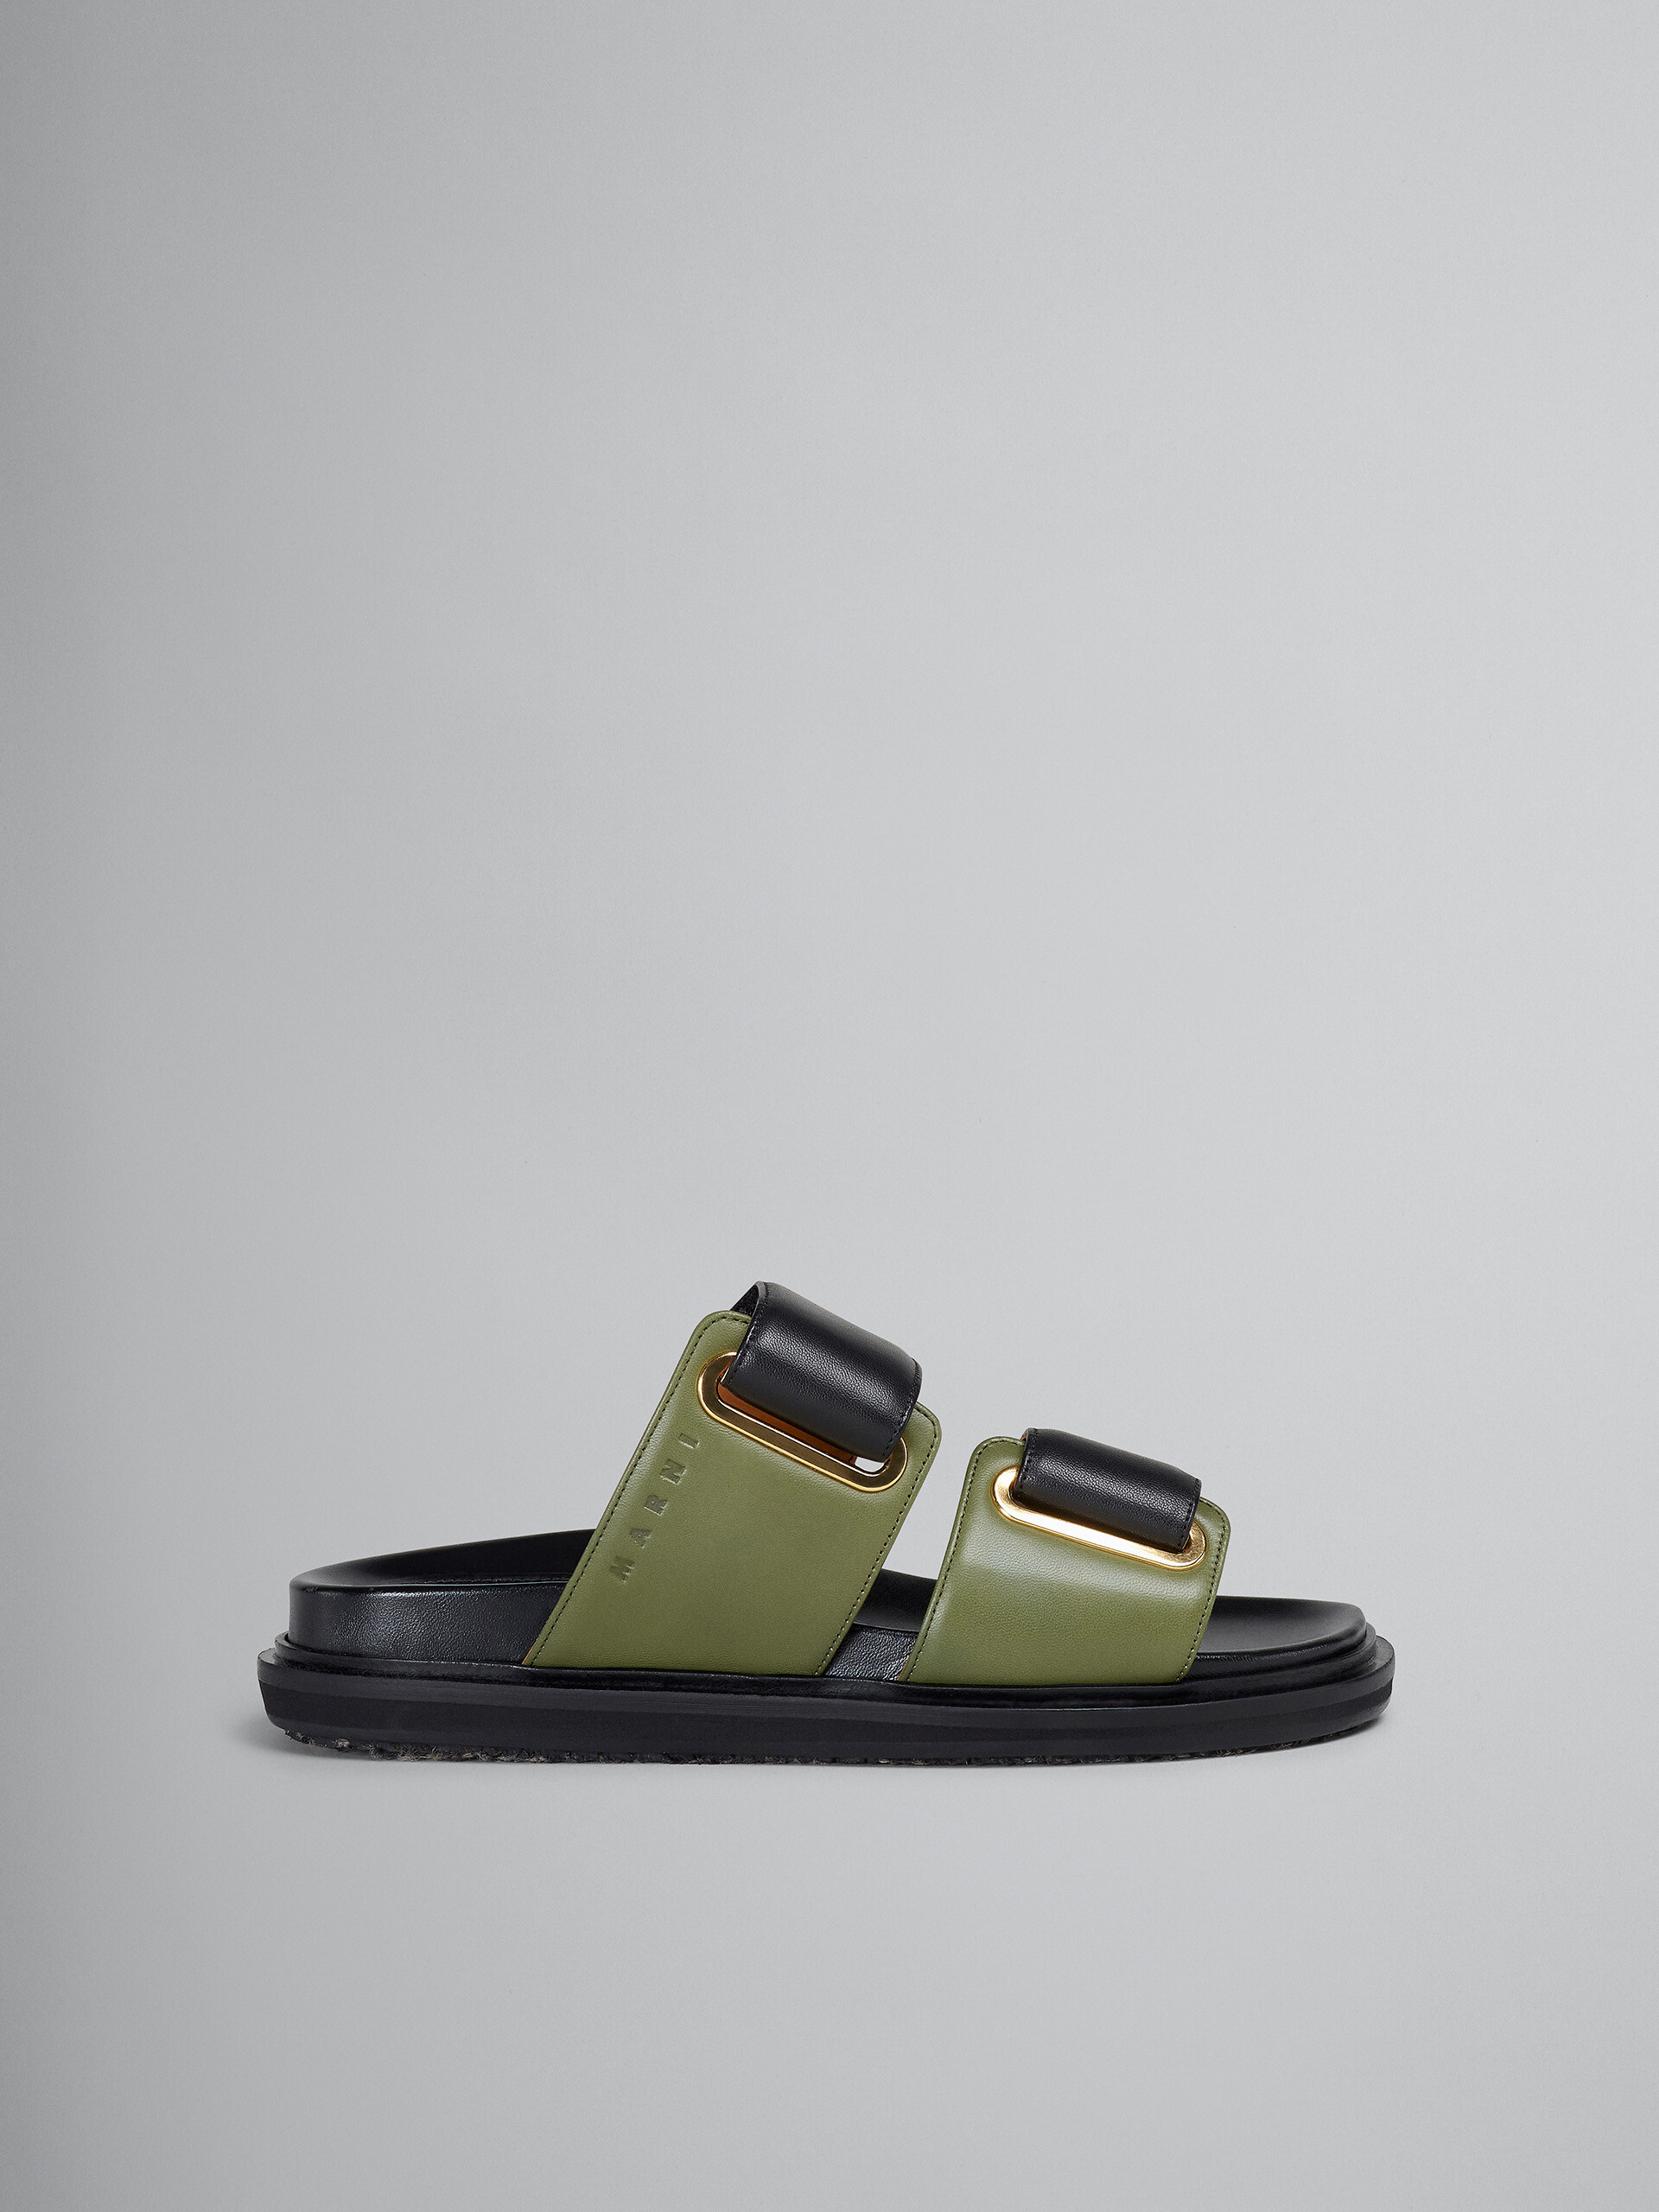 Black and green leather fussbett - Sandals - Image 1